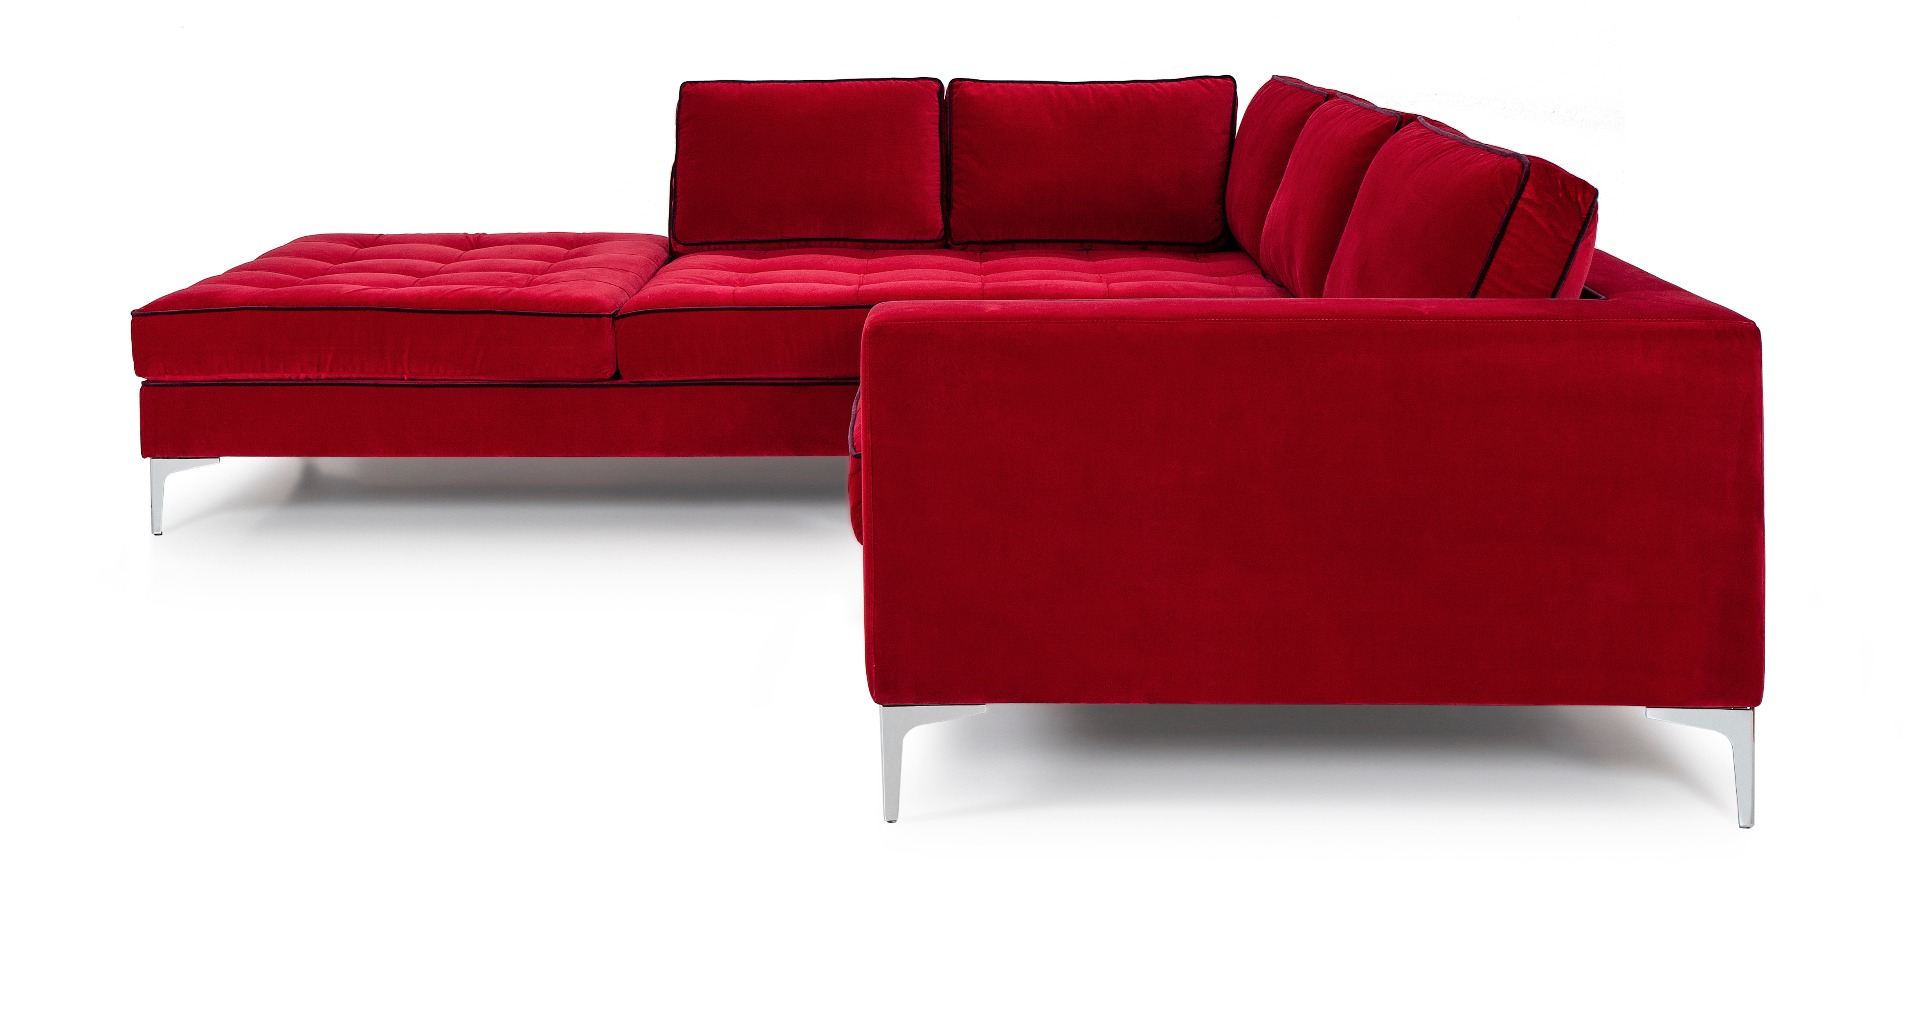 Luxury rich red Avant corner sofa with black piping by Luxuria London